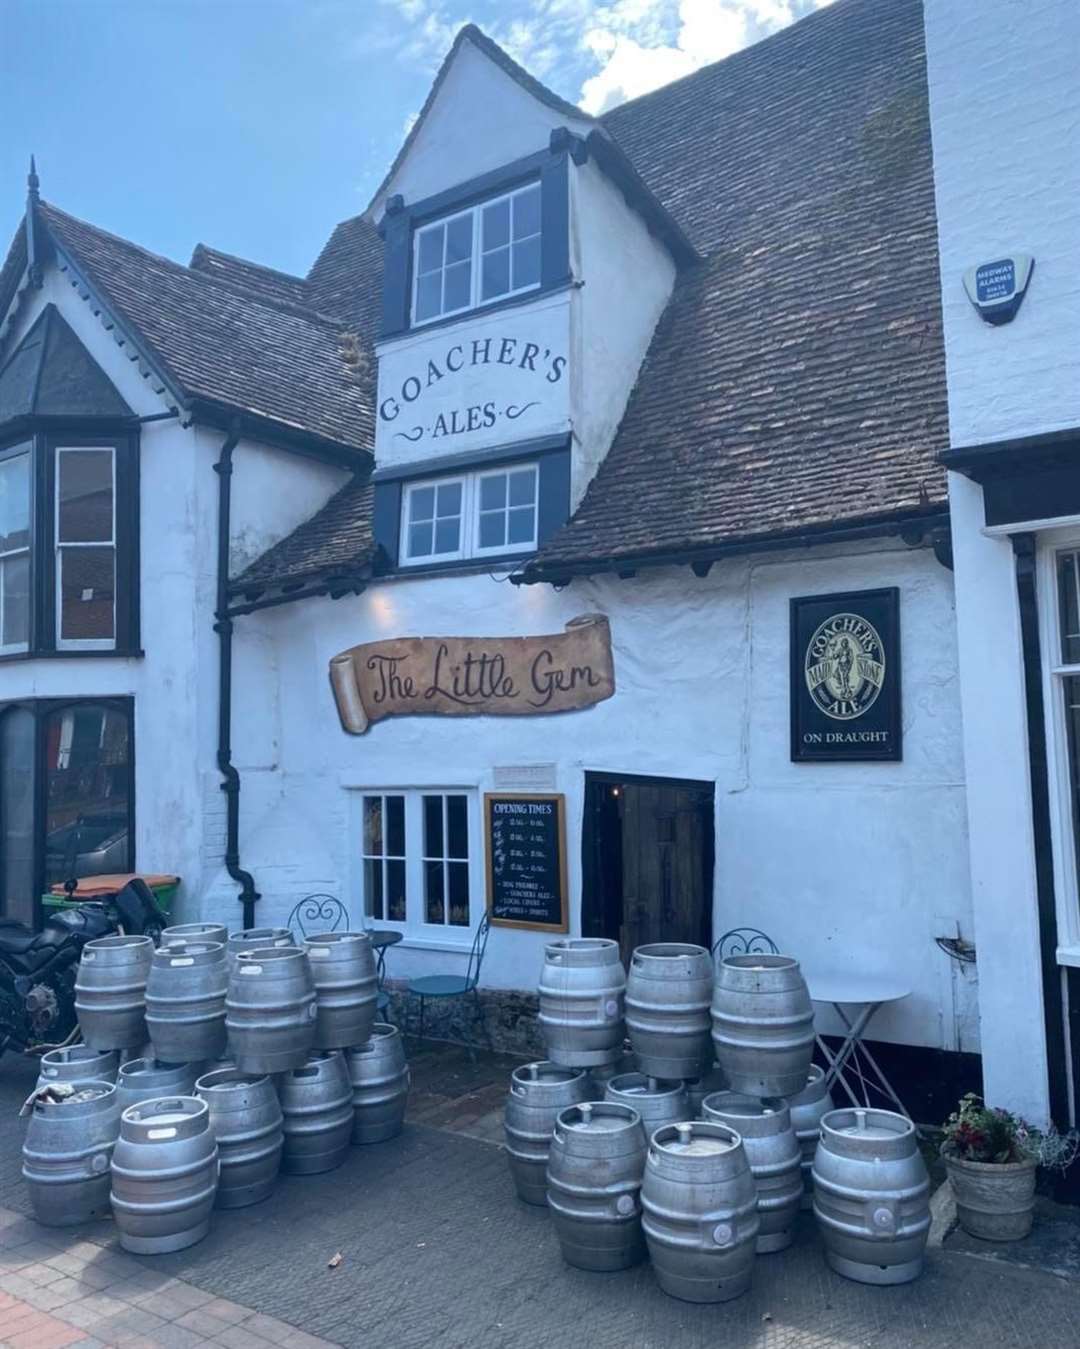 A delivery of Goachers Ales at the Little Gem - full casks on the left, empties on the right. Image: Goachers Ales